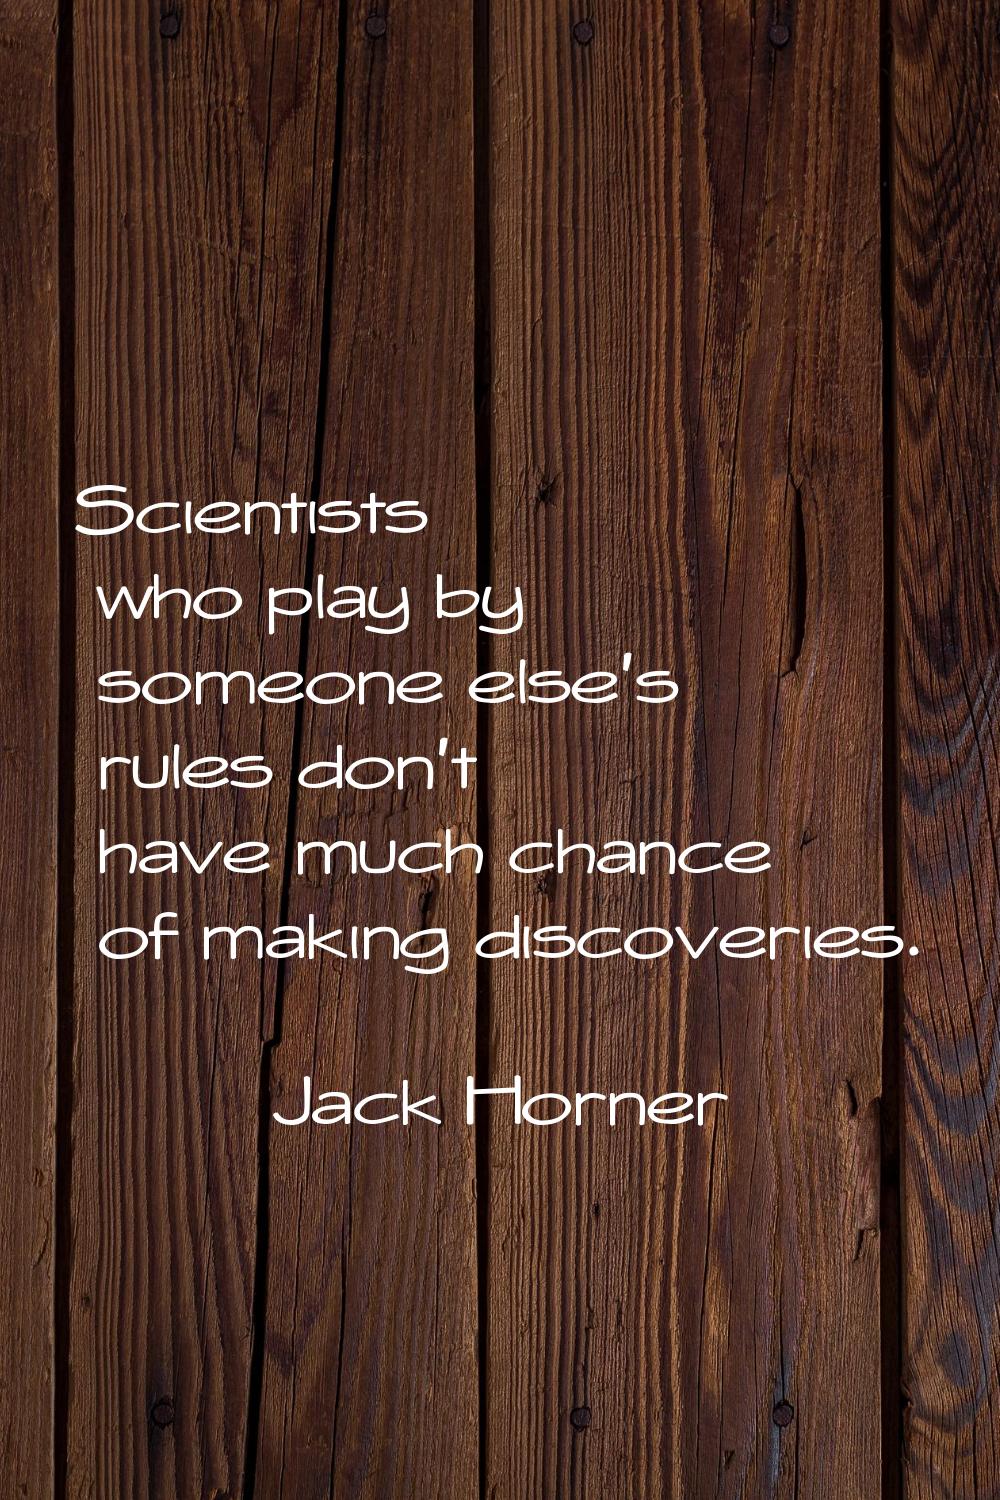 Scientists who play by someone else's rules don't have much chance of making discoveries.